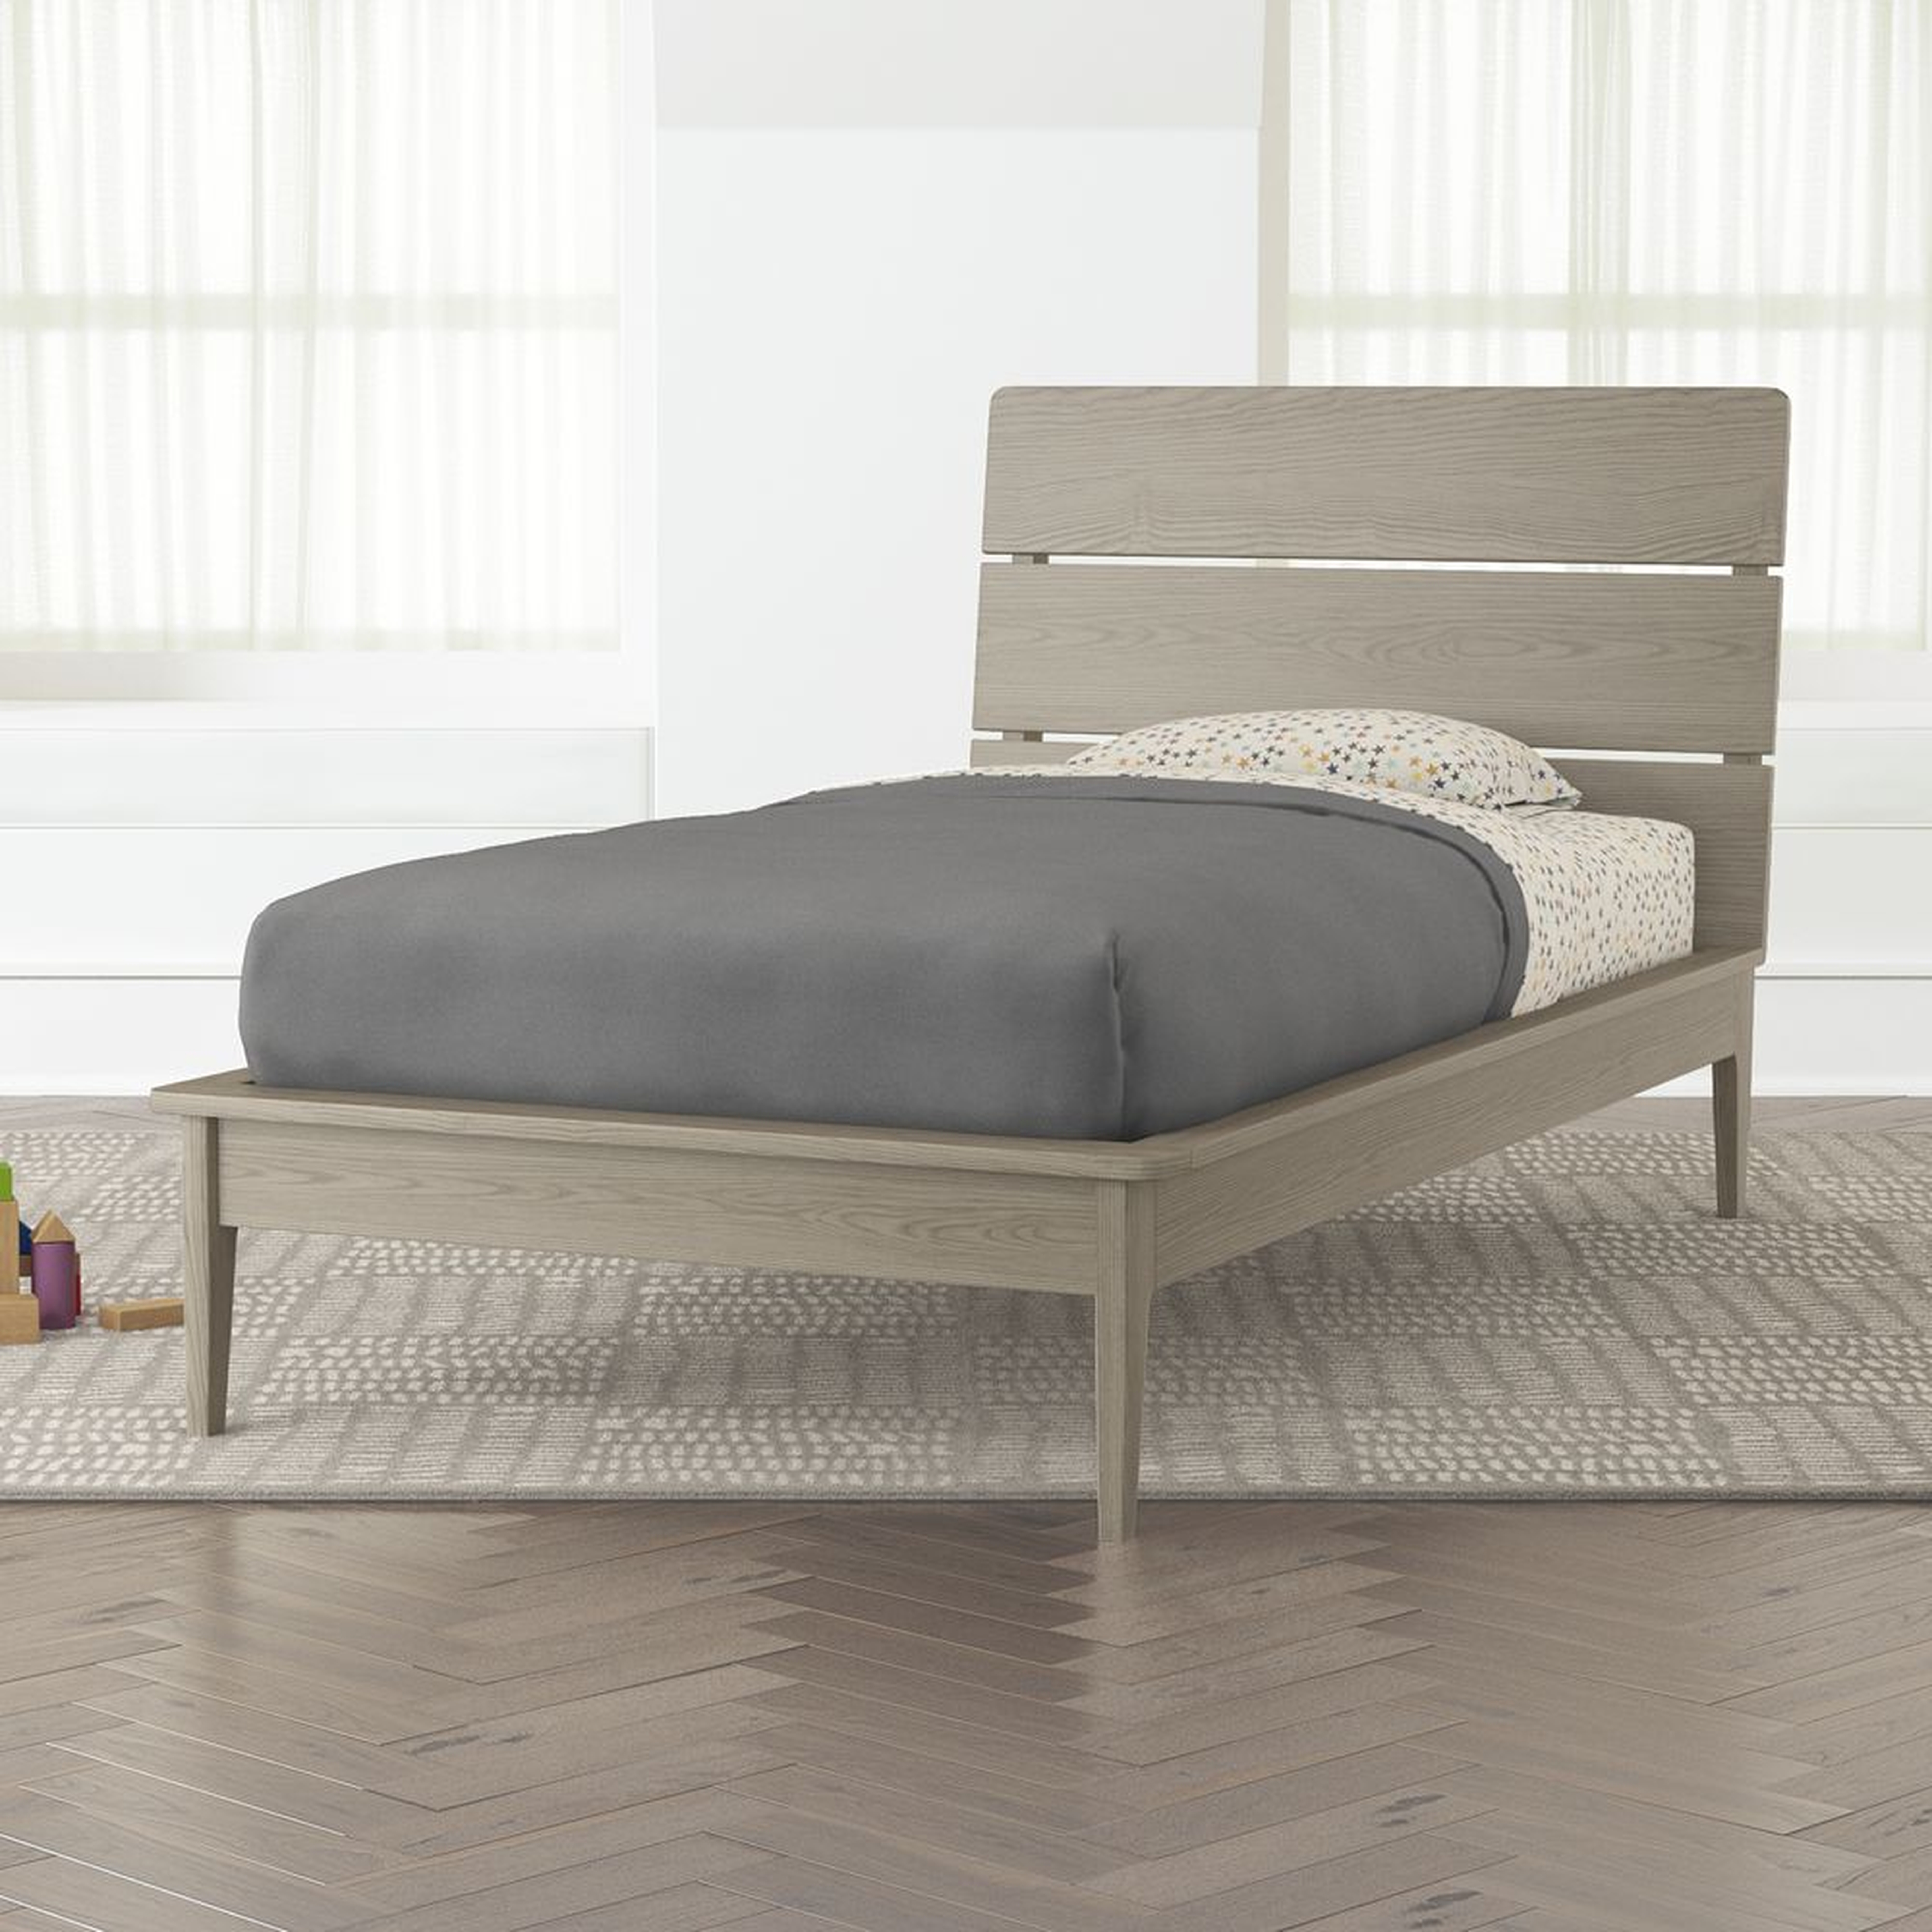 Wrightwood Grey Stain Twin Bed - Crate and Barrel